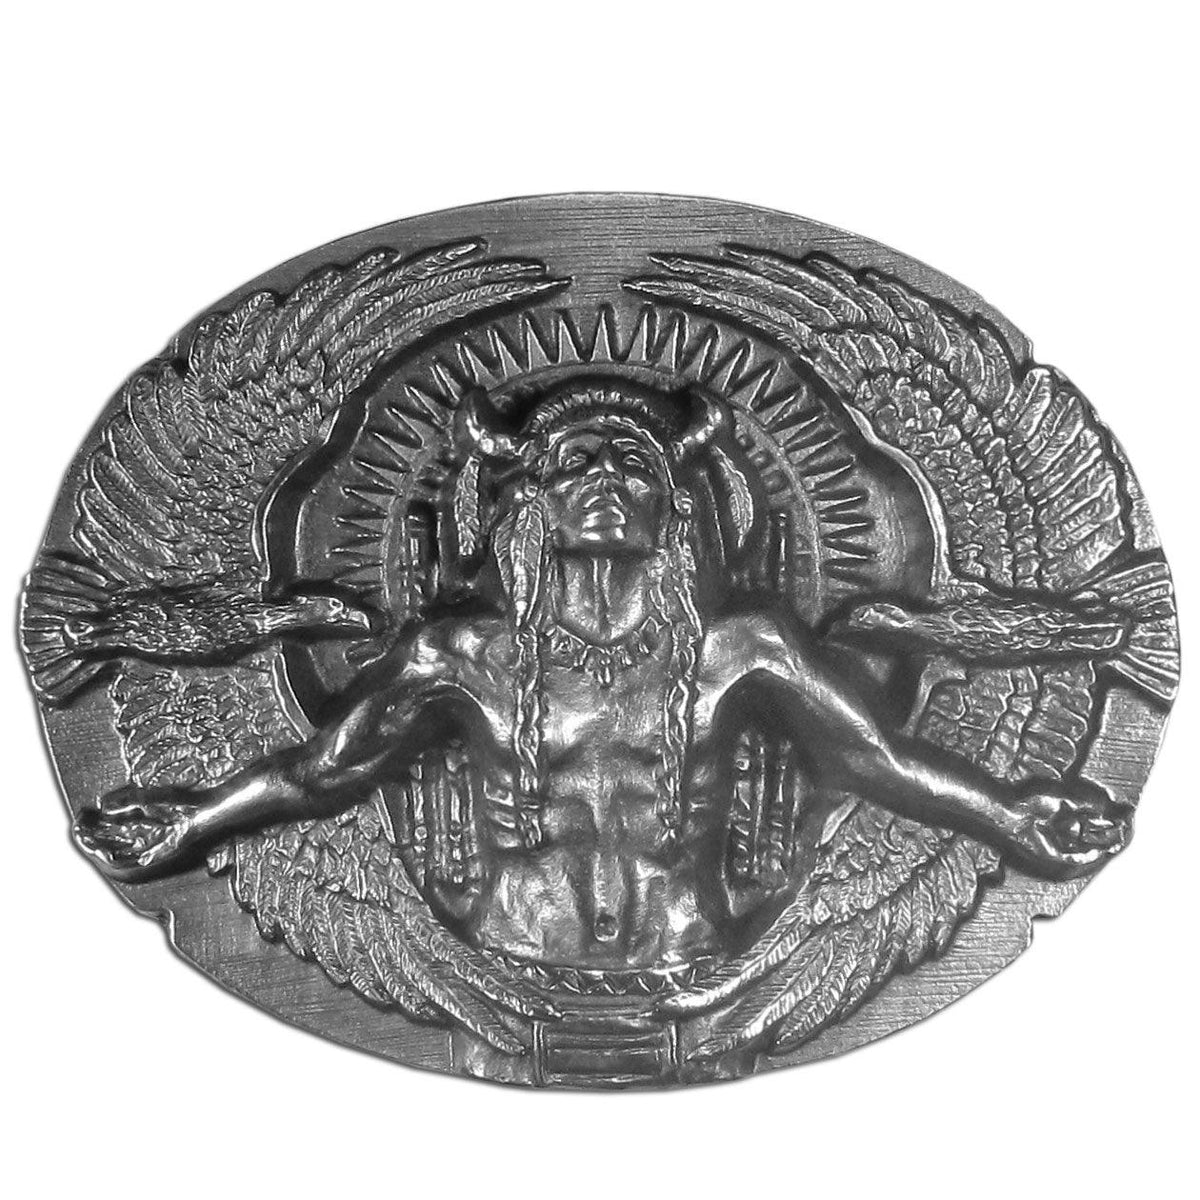 Indian and Eagles Antiqued Buckle - Flyclothing LLC